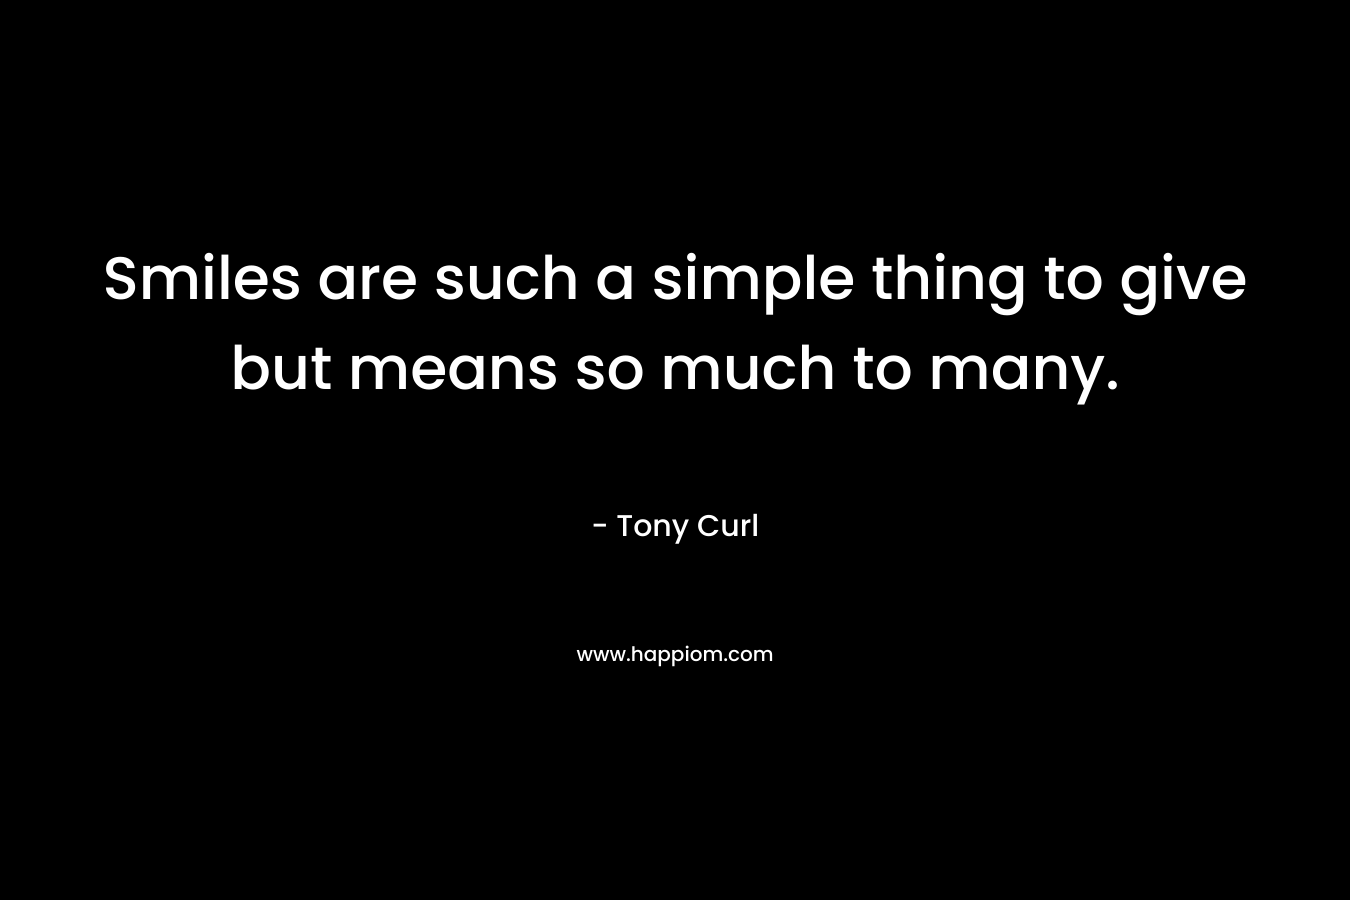 Smiles are such a simple thing to give but means so much to many. – Tony Curl